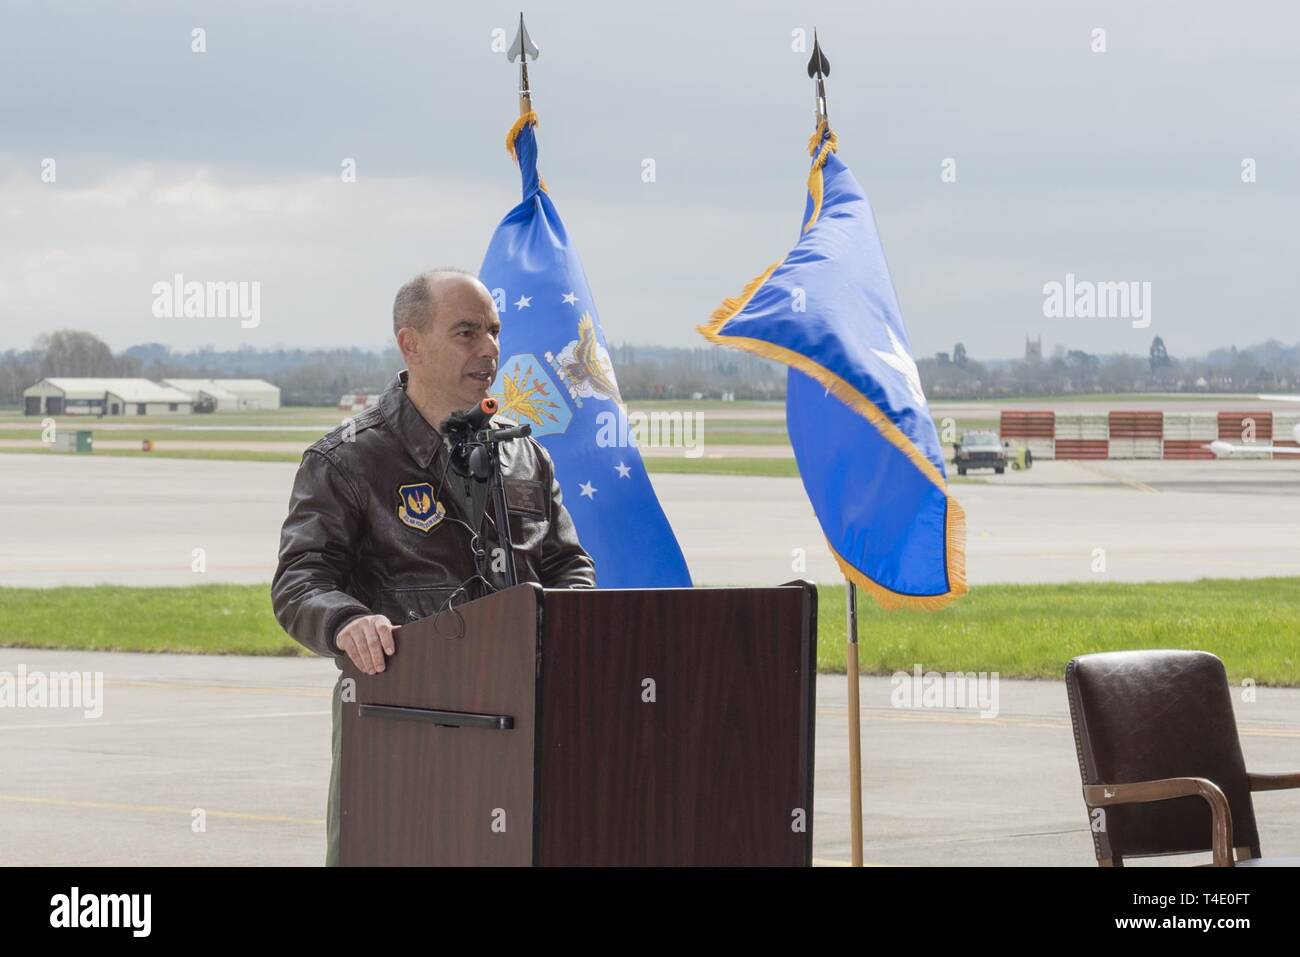 U.S. Air Force Lt. Gen. Jeffrey Harrigian, U.S. Air Forces in Europe and Air Forces in Africa deputy commander, speaks during a press conference at RAF Fairford, March 19, 2019, regarding a Bomber Task Force Europe deployment. The contingent of B-52 aircraft, Airmen and support equipment are currently deployed from the 2nd Bomb Wing, Barksdale Air Force Base, La., to support the BTF. The deployment of strategic bombers to the U.K. helps exercise RAF Fairford as USAFE-AFAFRICA's forward-operating location for bombers. The deployment includes joint and allied training to enhance interoperability Stock Photo